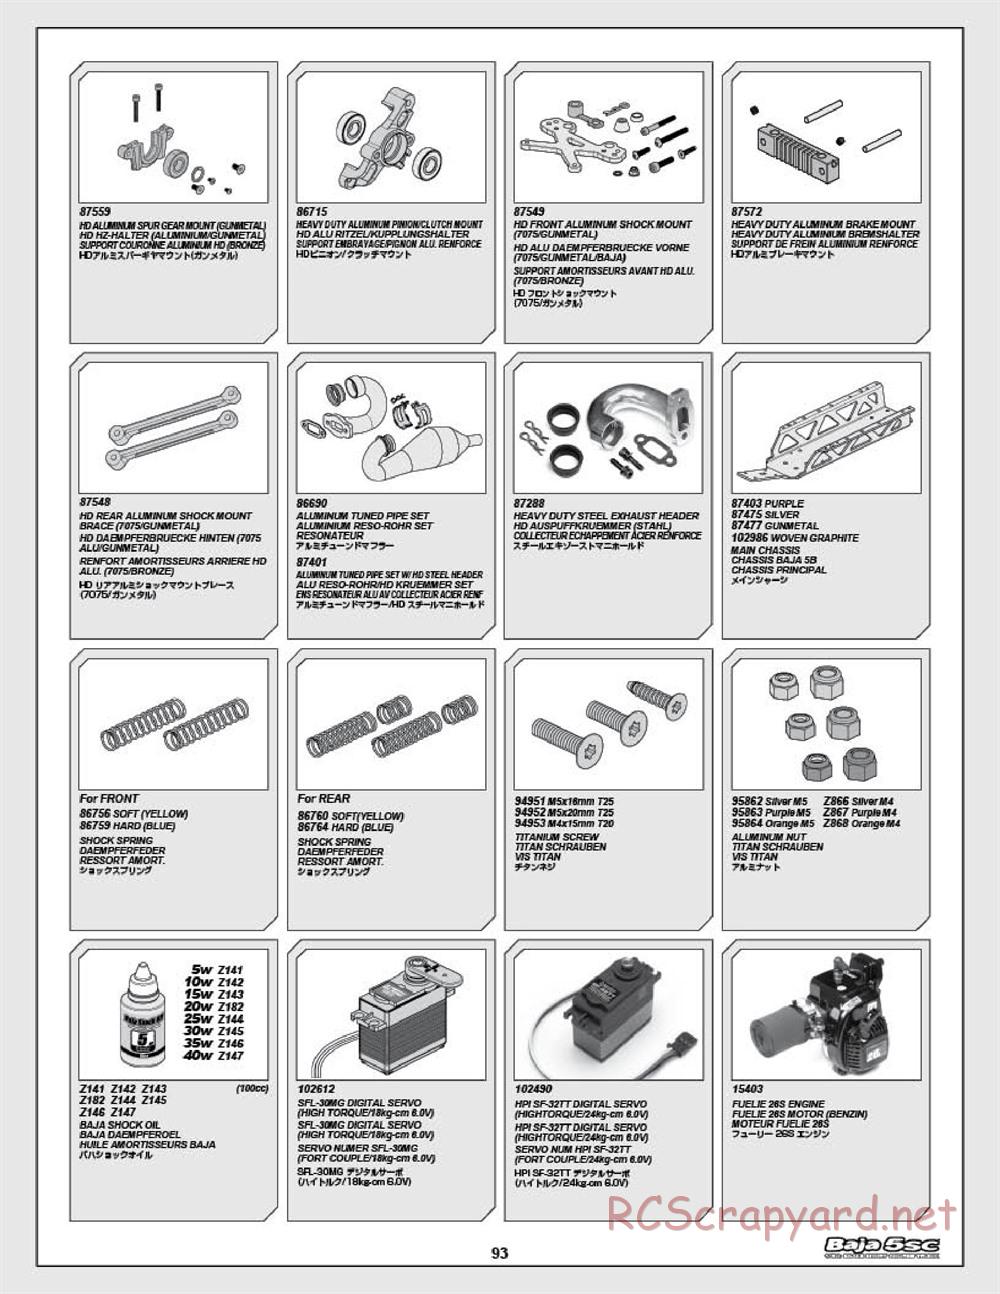 HPI - Baja 5SC - Exploded View - Page 93